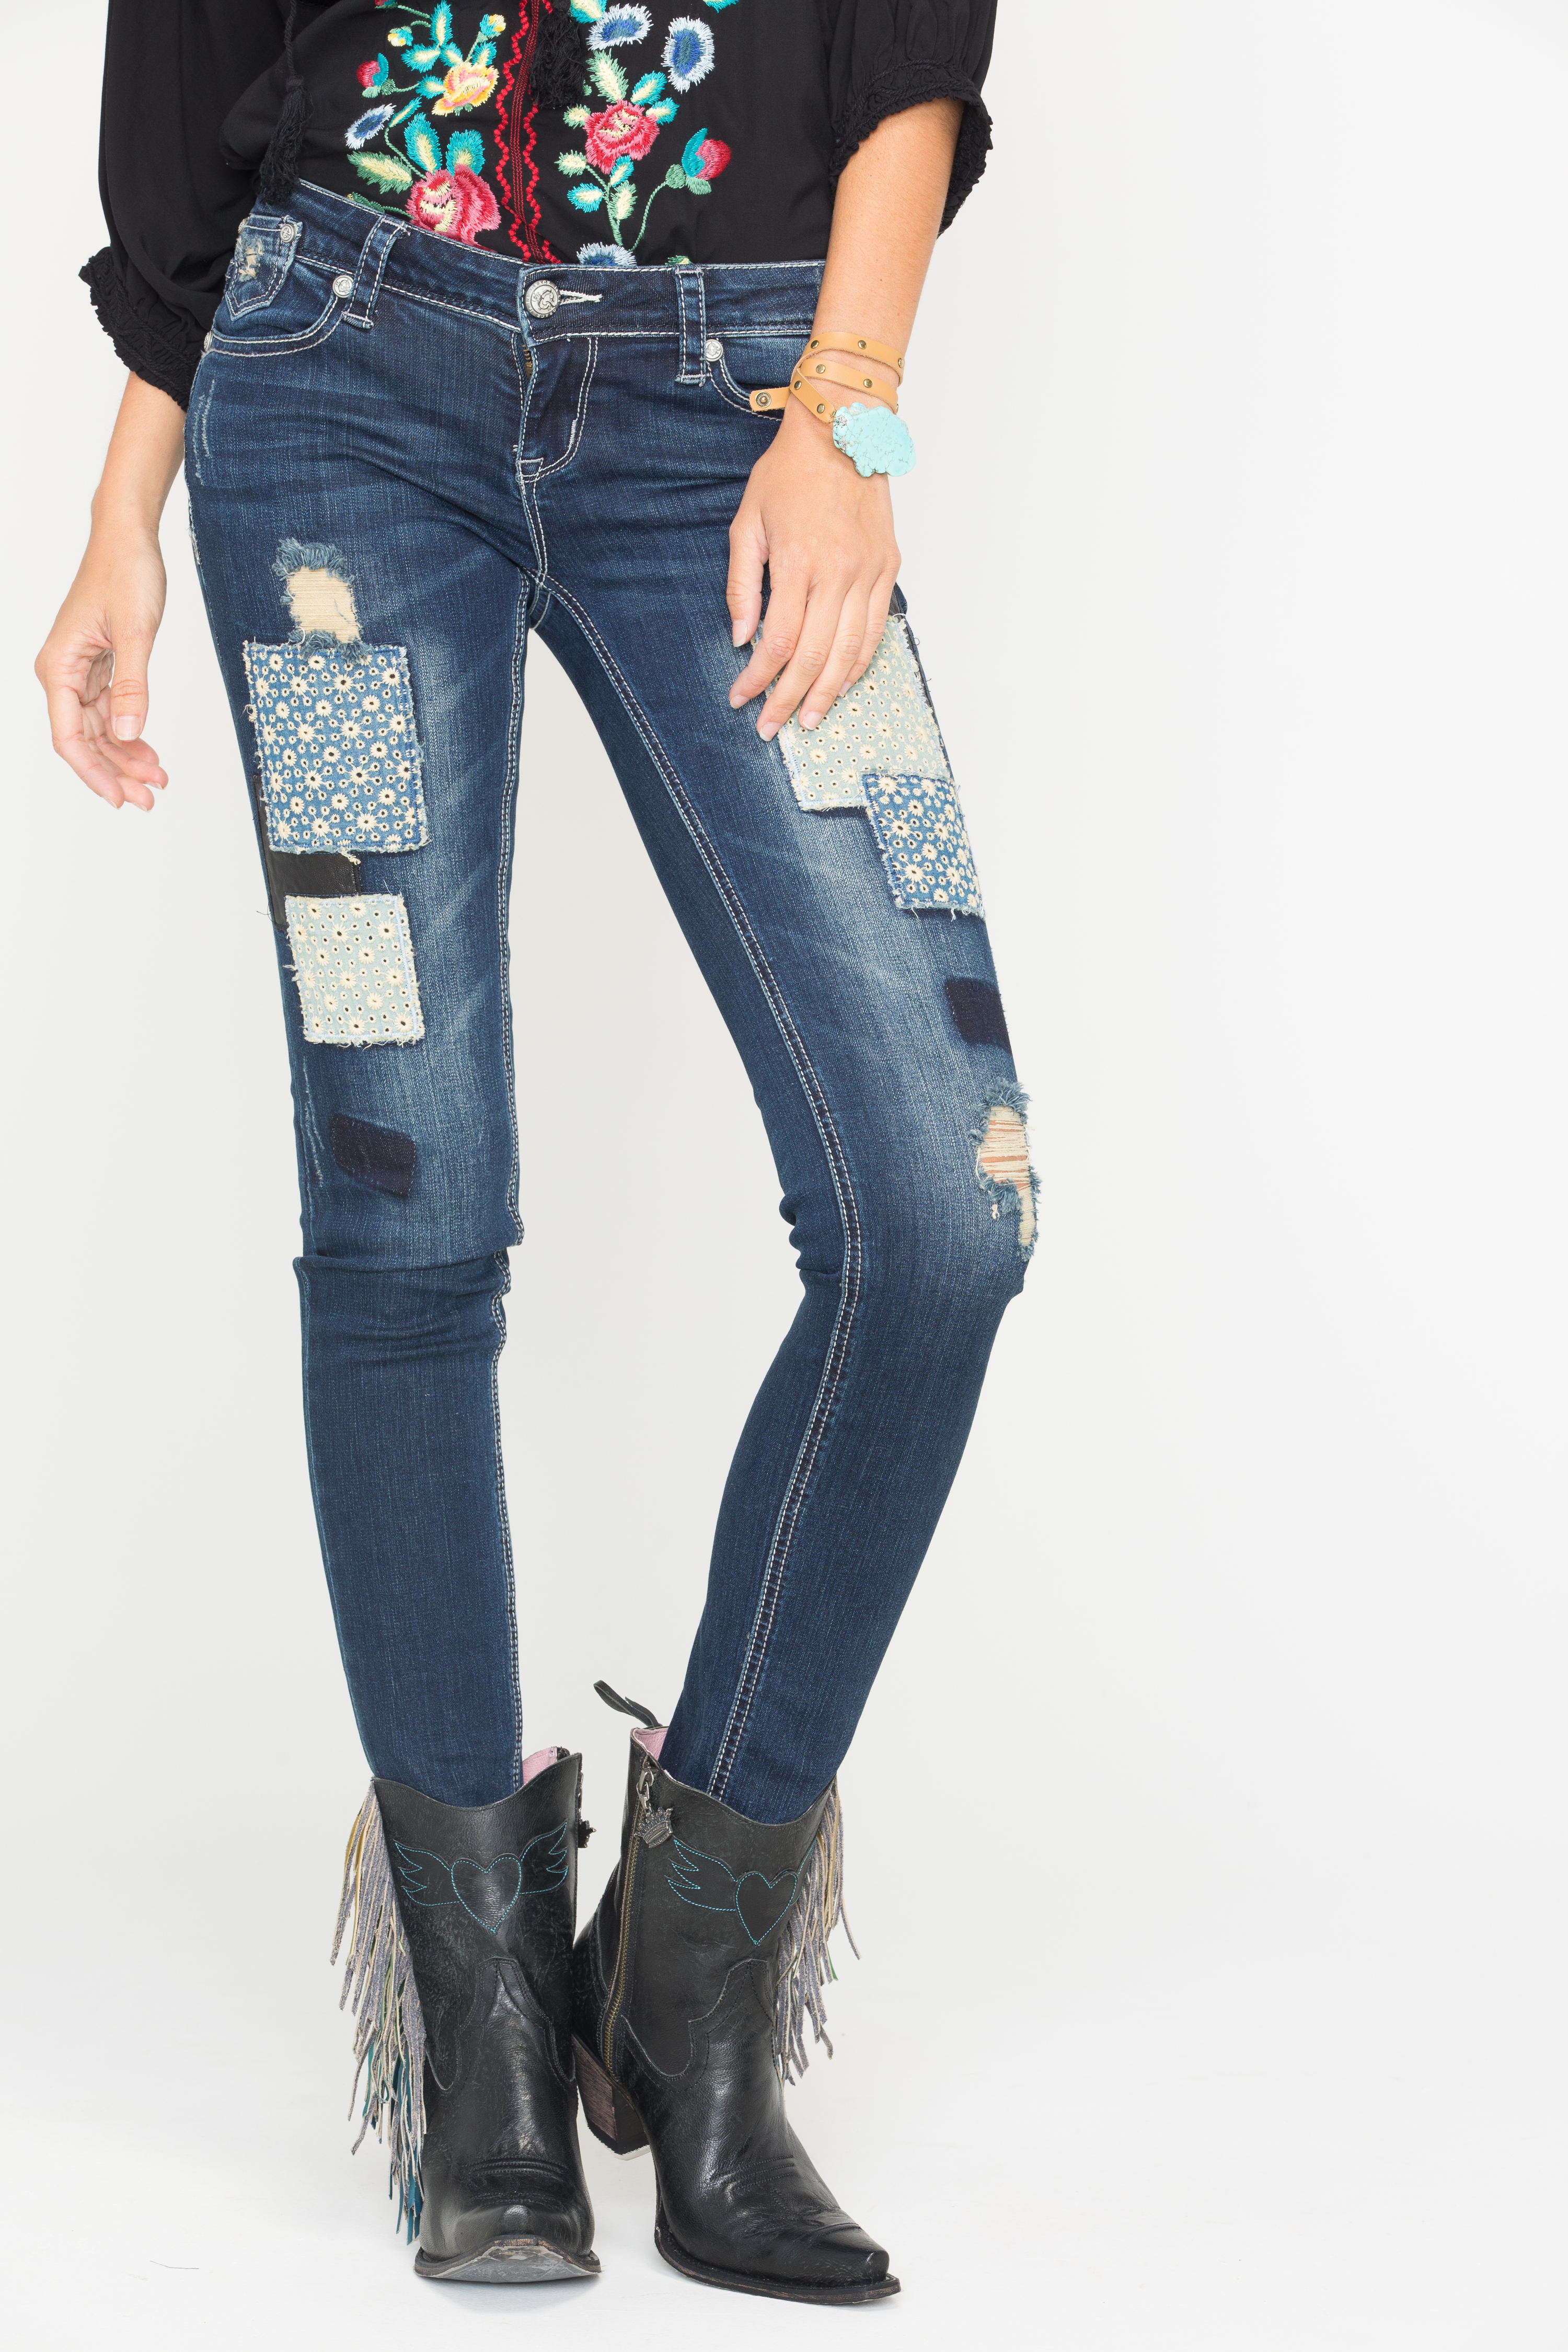 Grace in LA Women's Skinny Patchwork Jeans - Country Outfitter